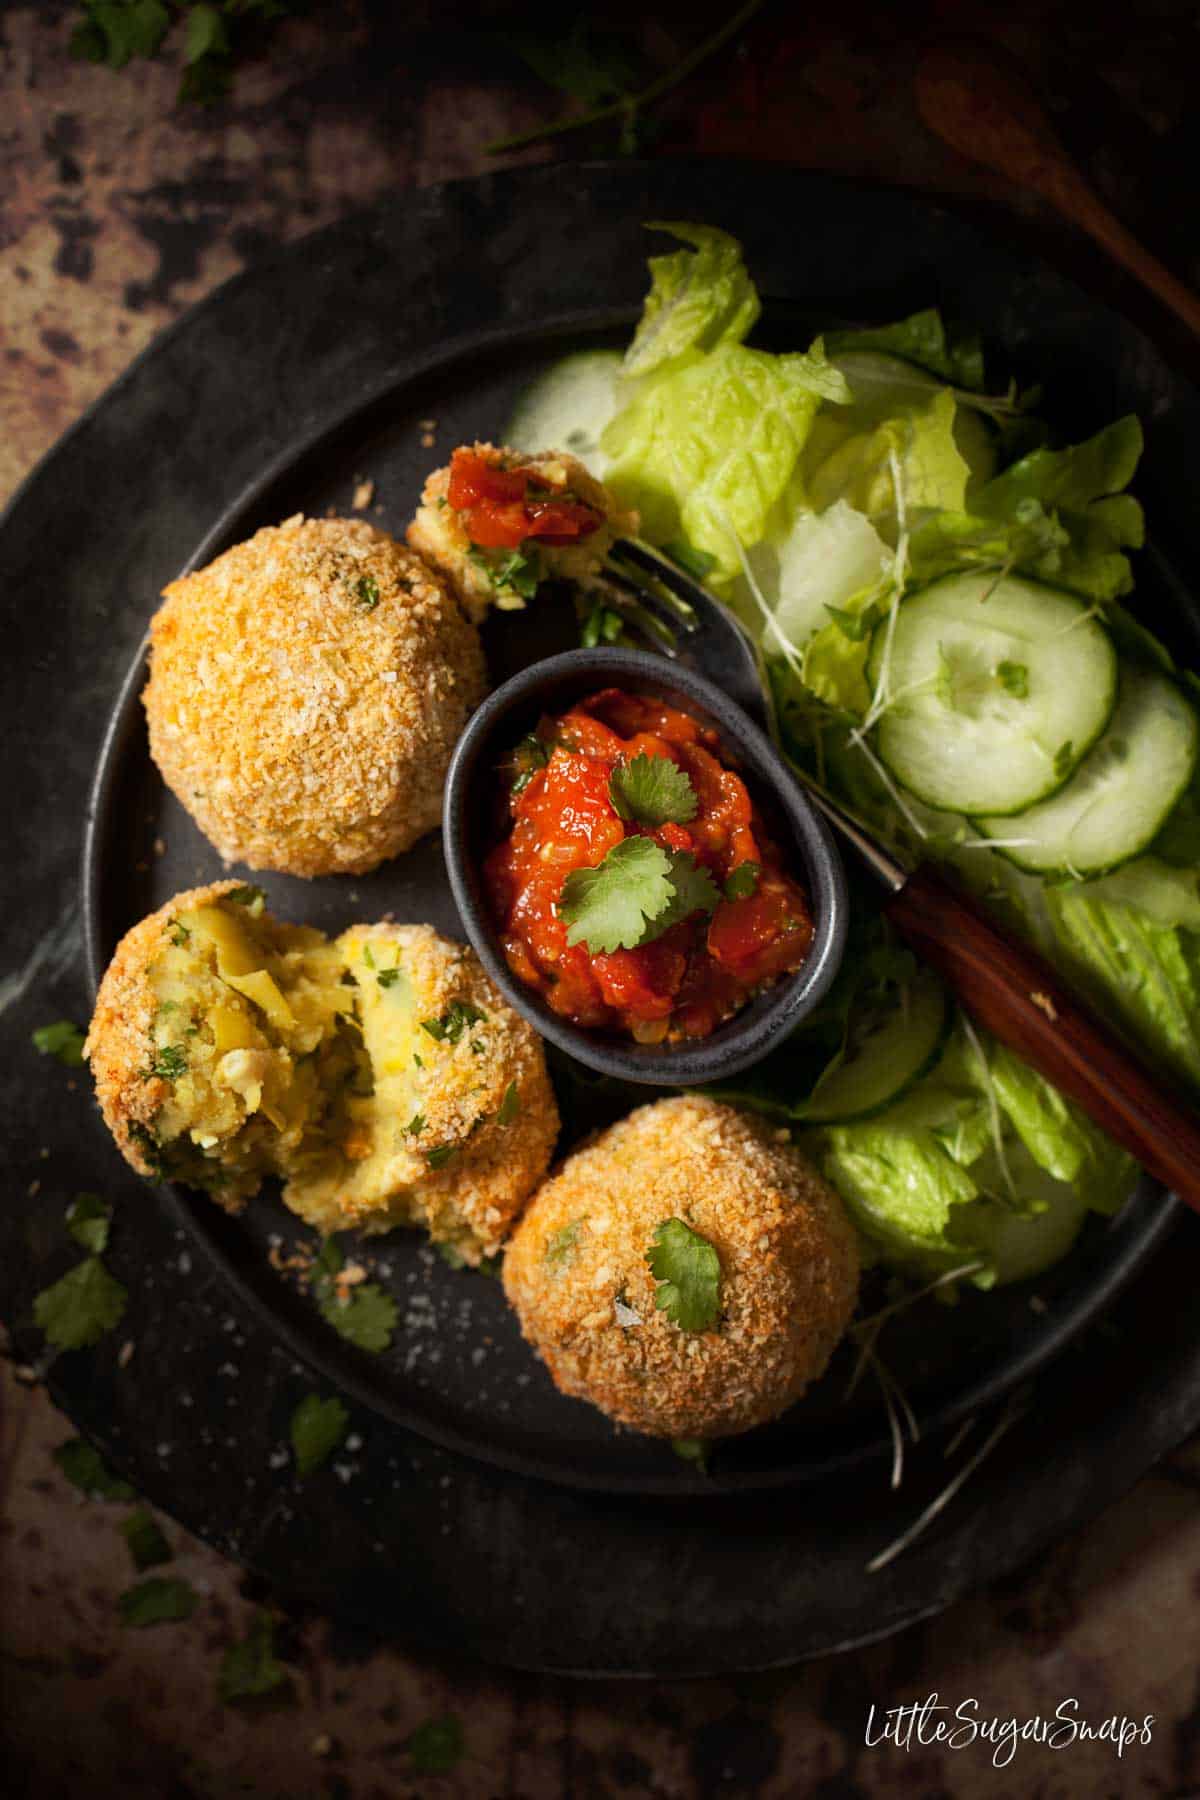 Three fish cakes served with spicy tomato sauce and a green salad